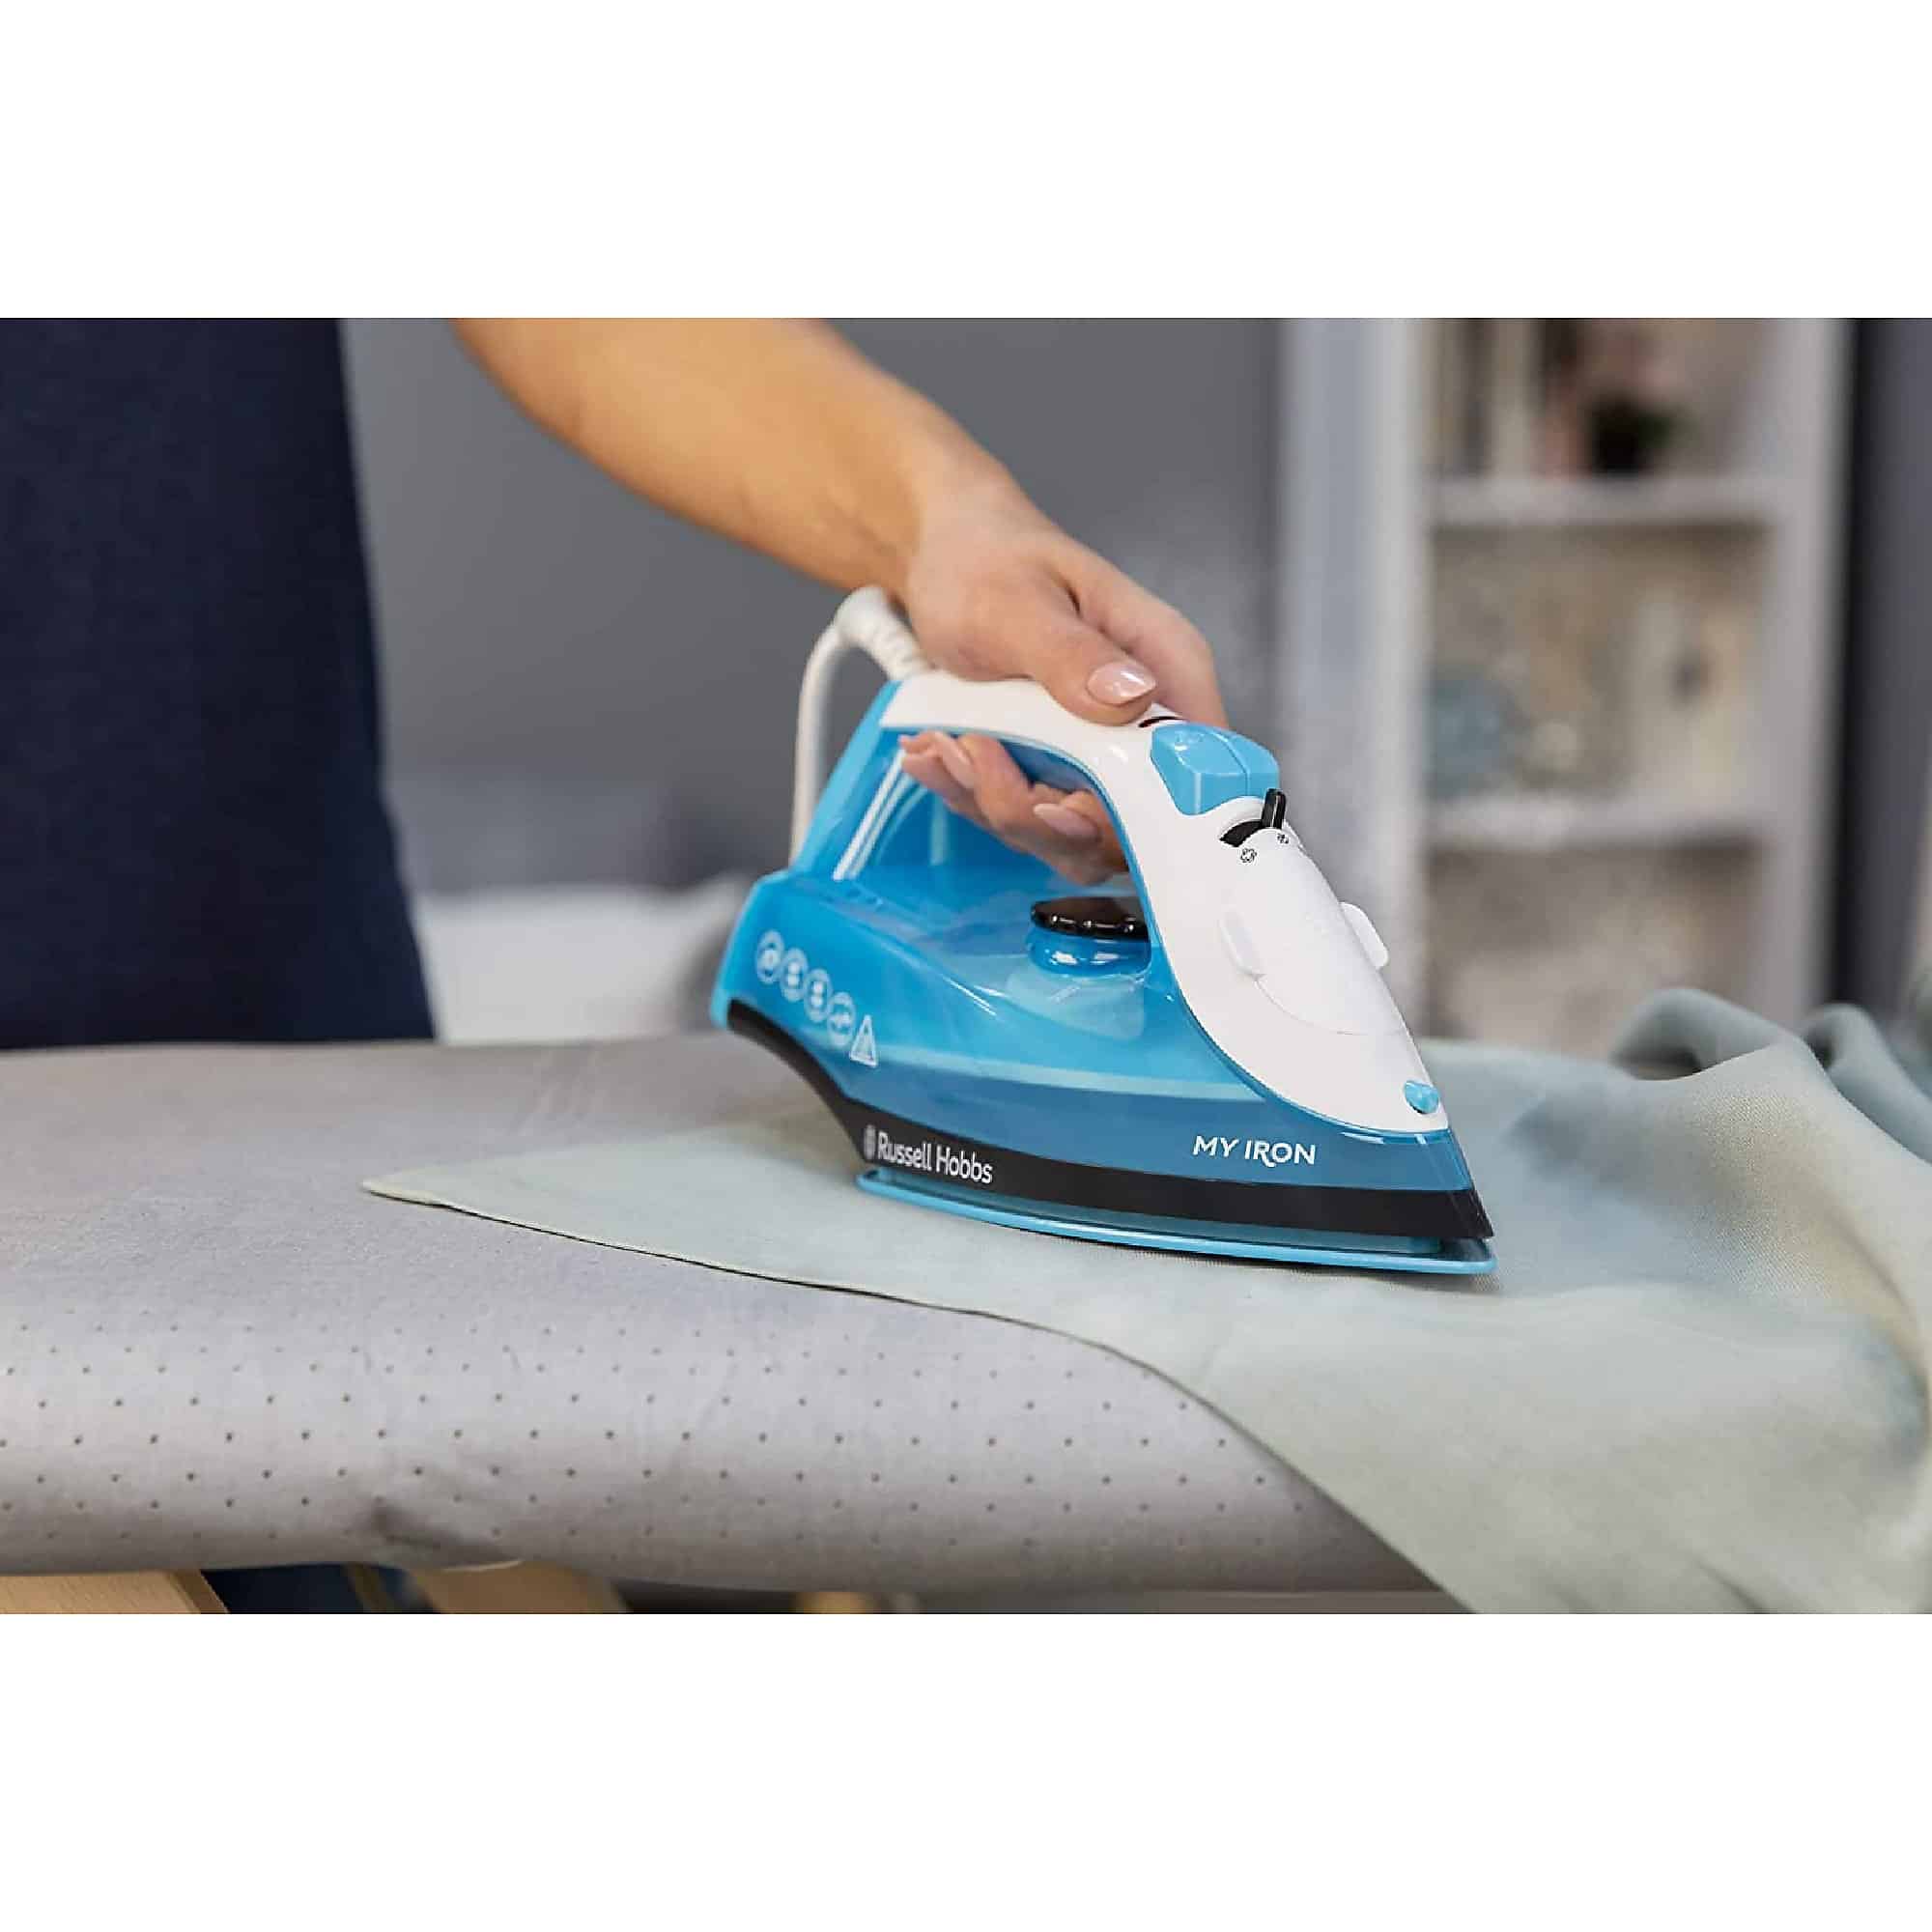 Russell Hobbs 25580 My Iron Steam Iron 1800W, 0.26L Water Tank - Blue and White-1138